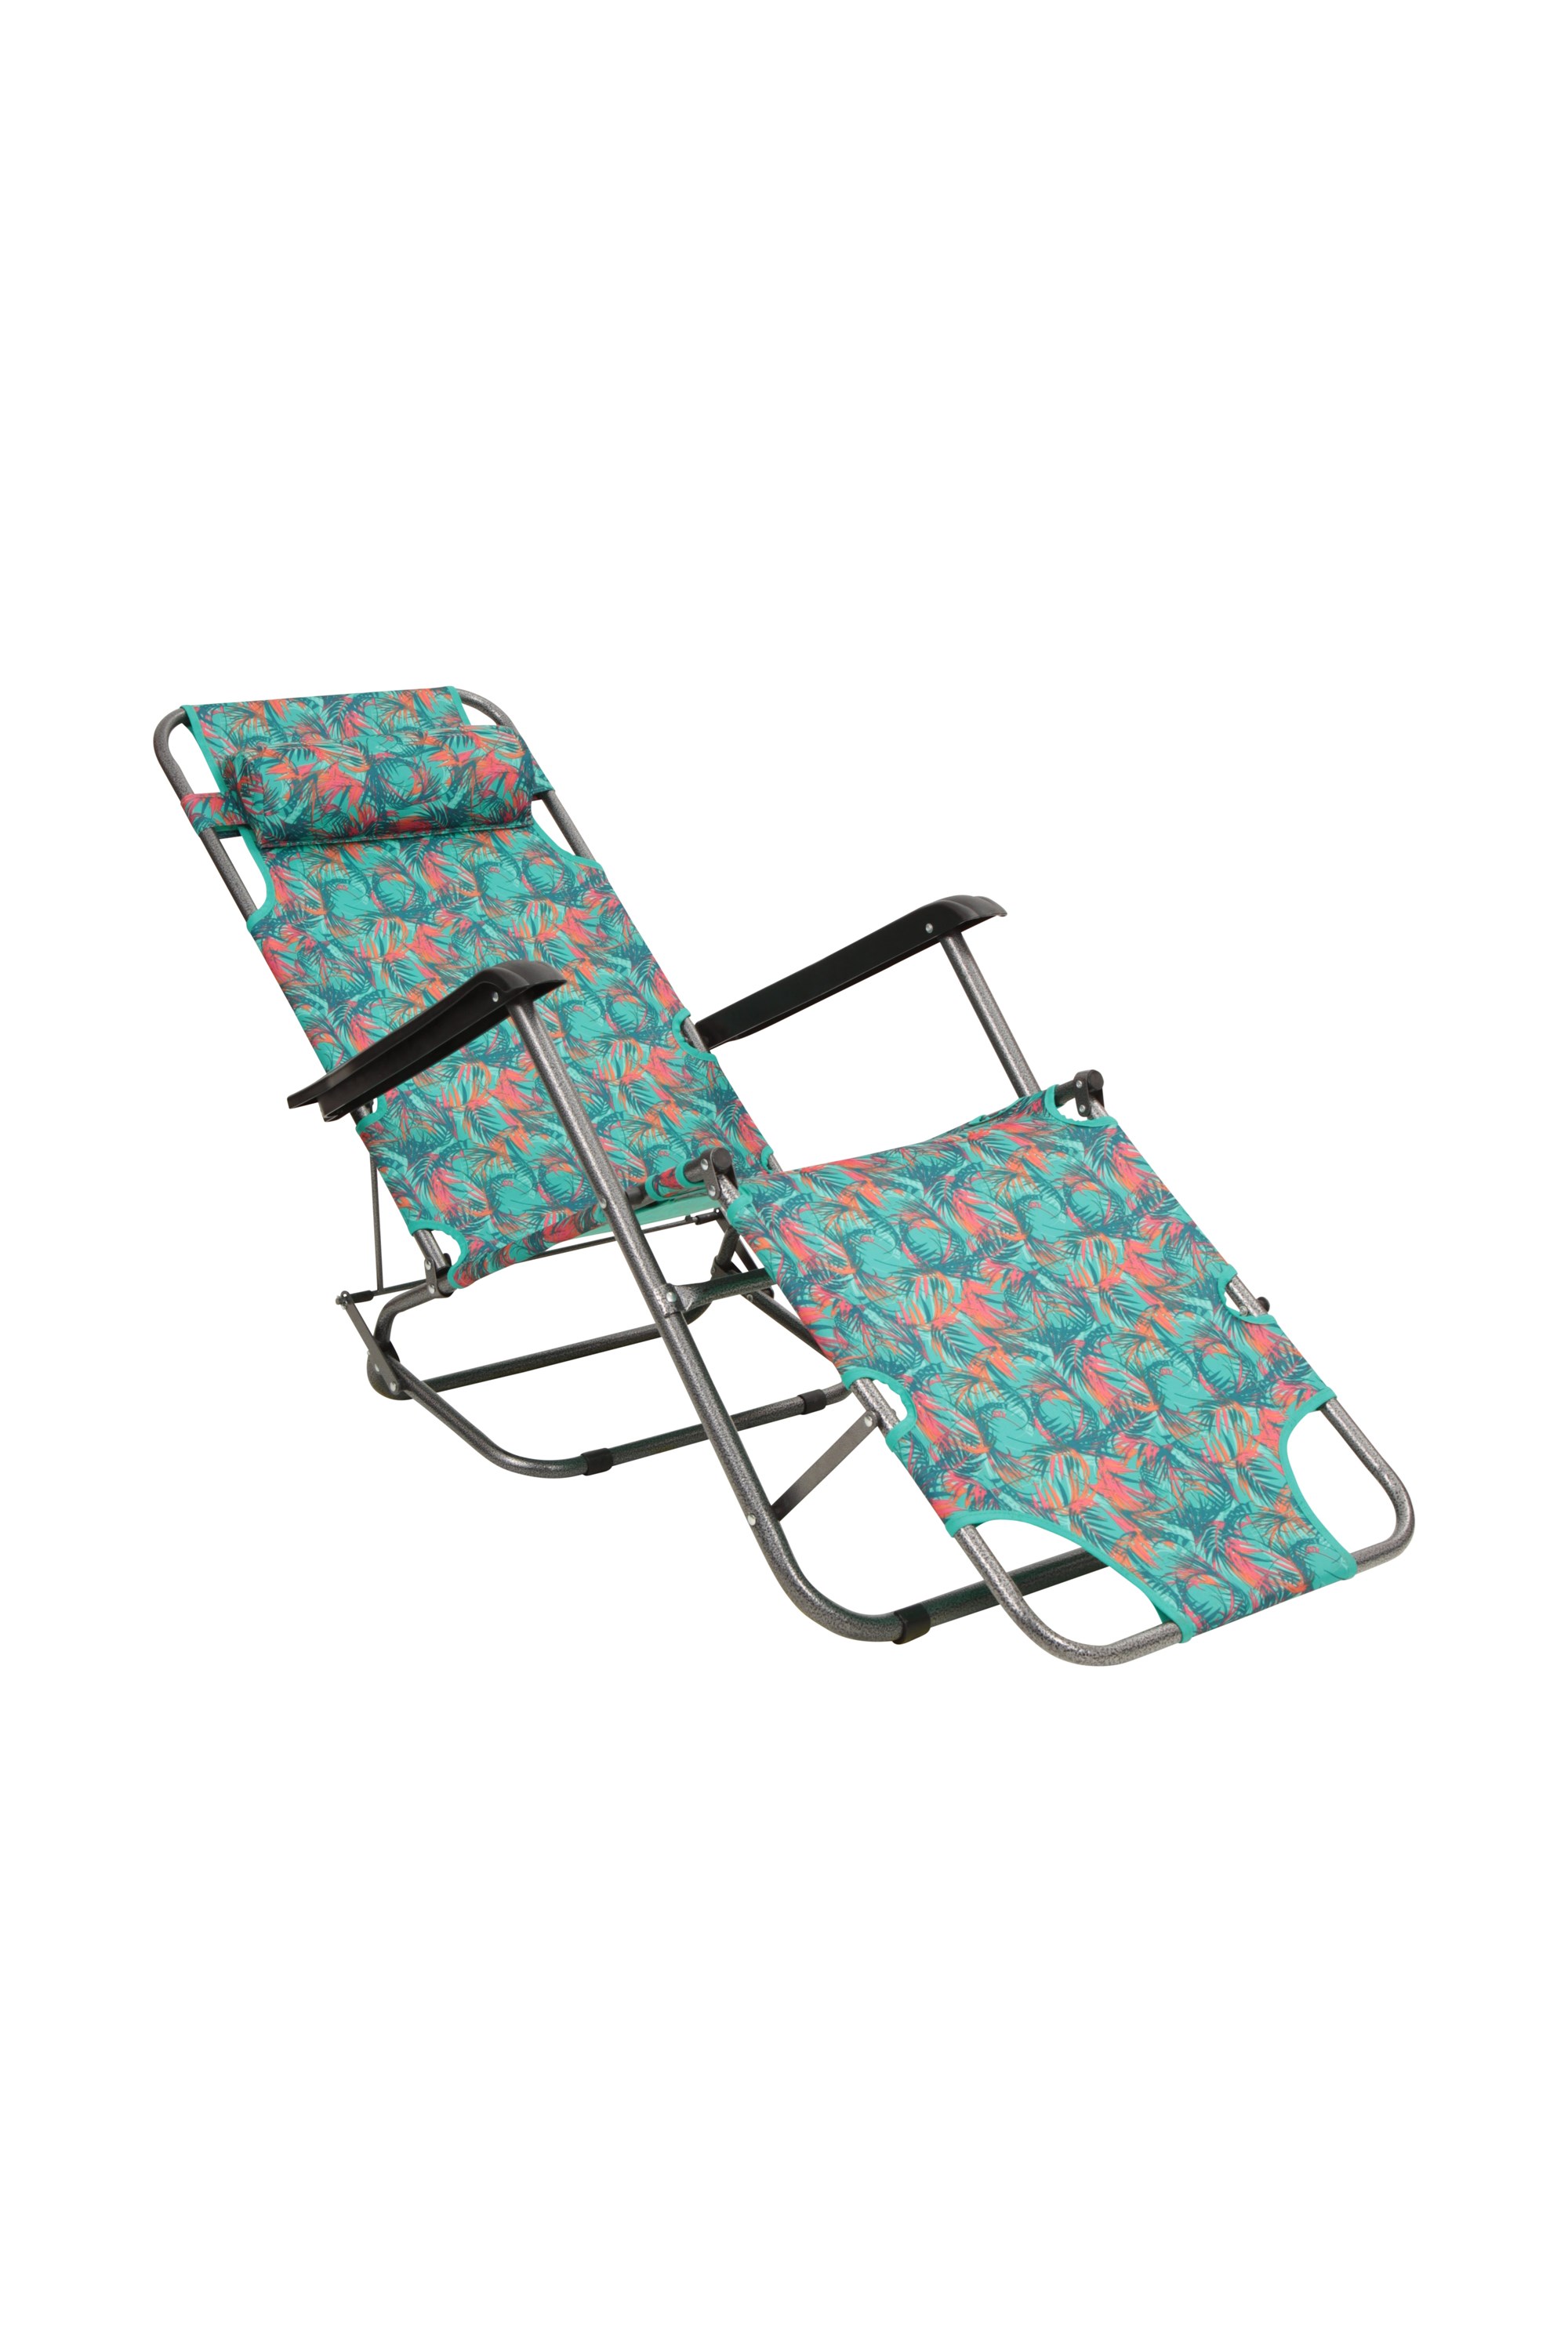 Sunlounger Folding Chair - Patterned 